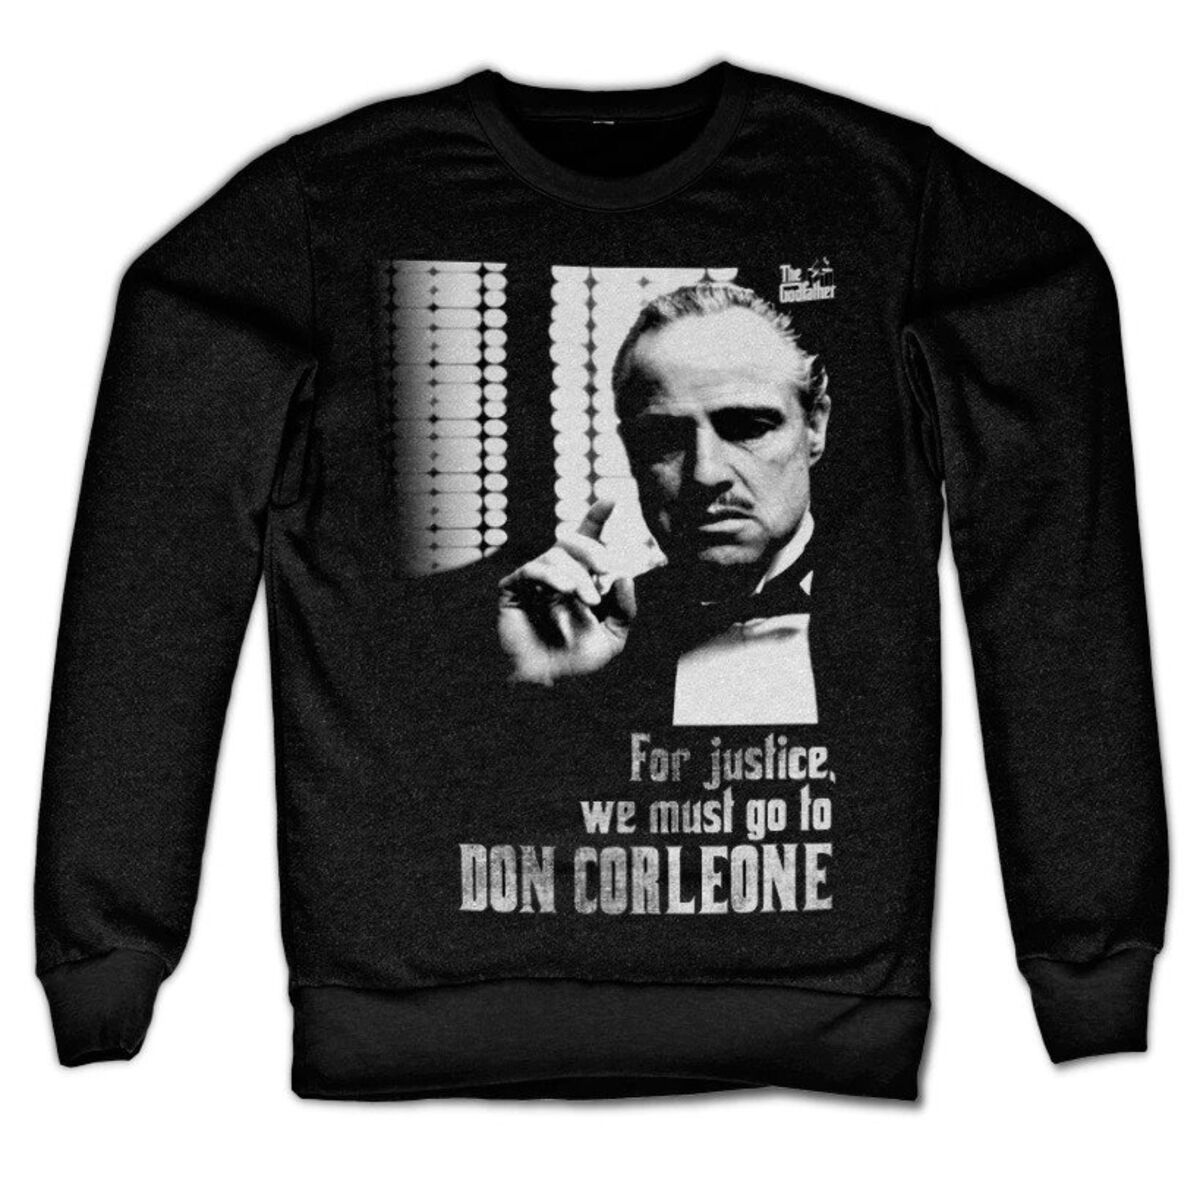 GodFather---For-Justice-Sweats